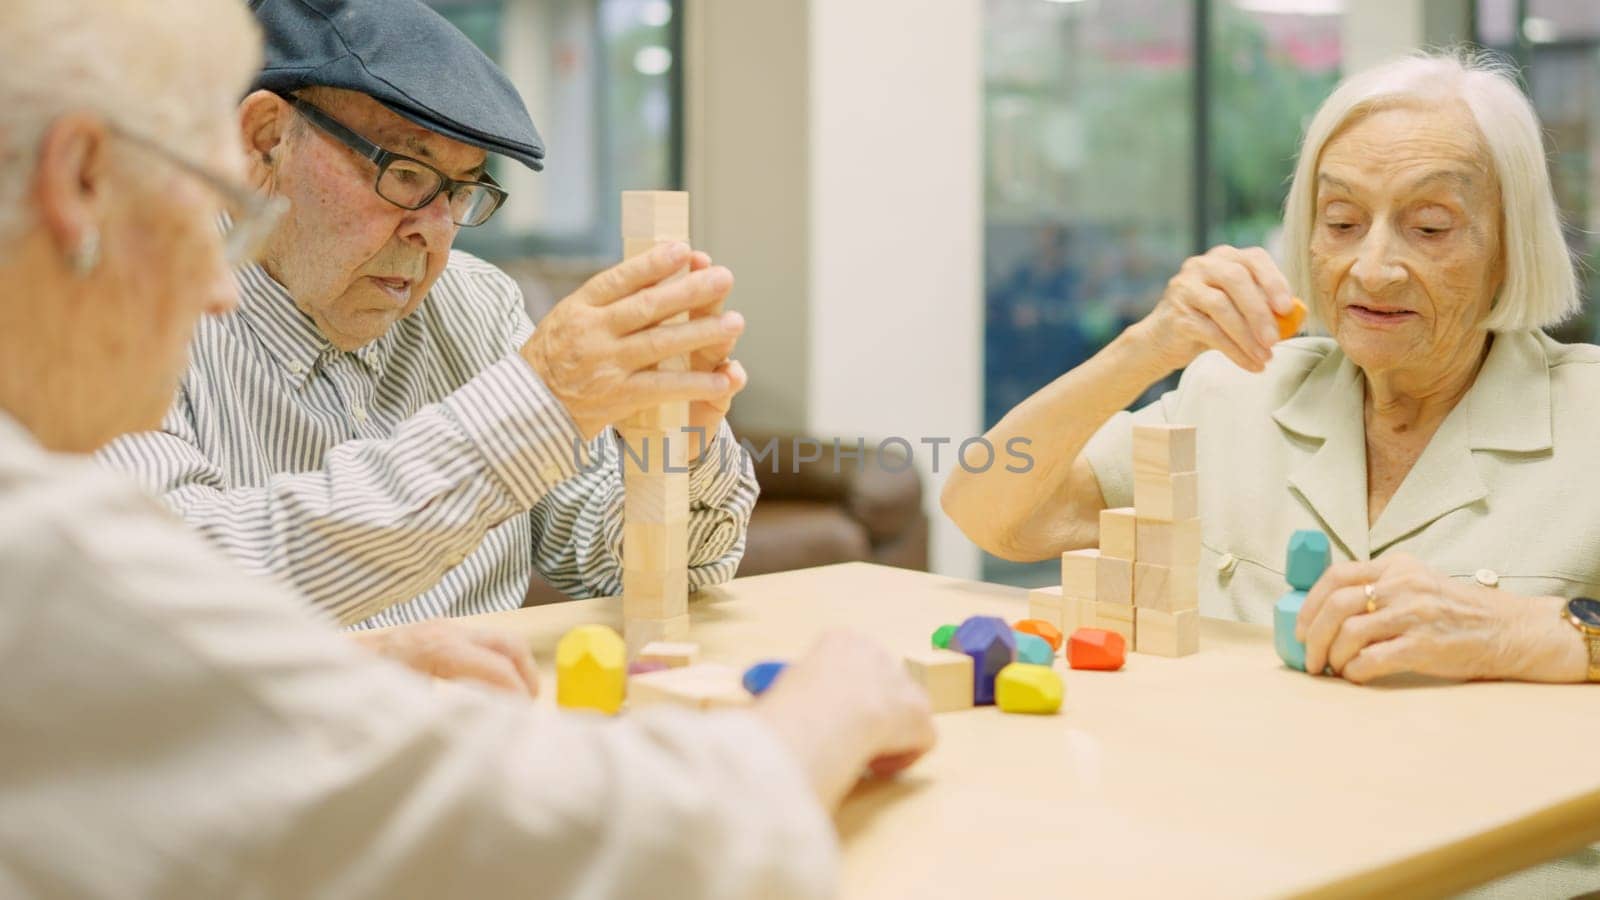 Three concentrated seniors resolving brain skill games with wooden pieces in a geriatric